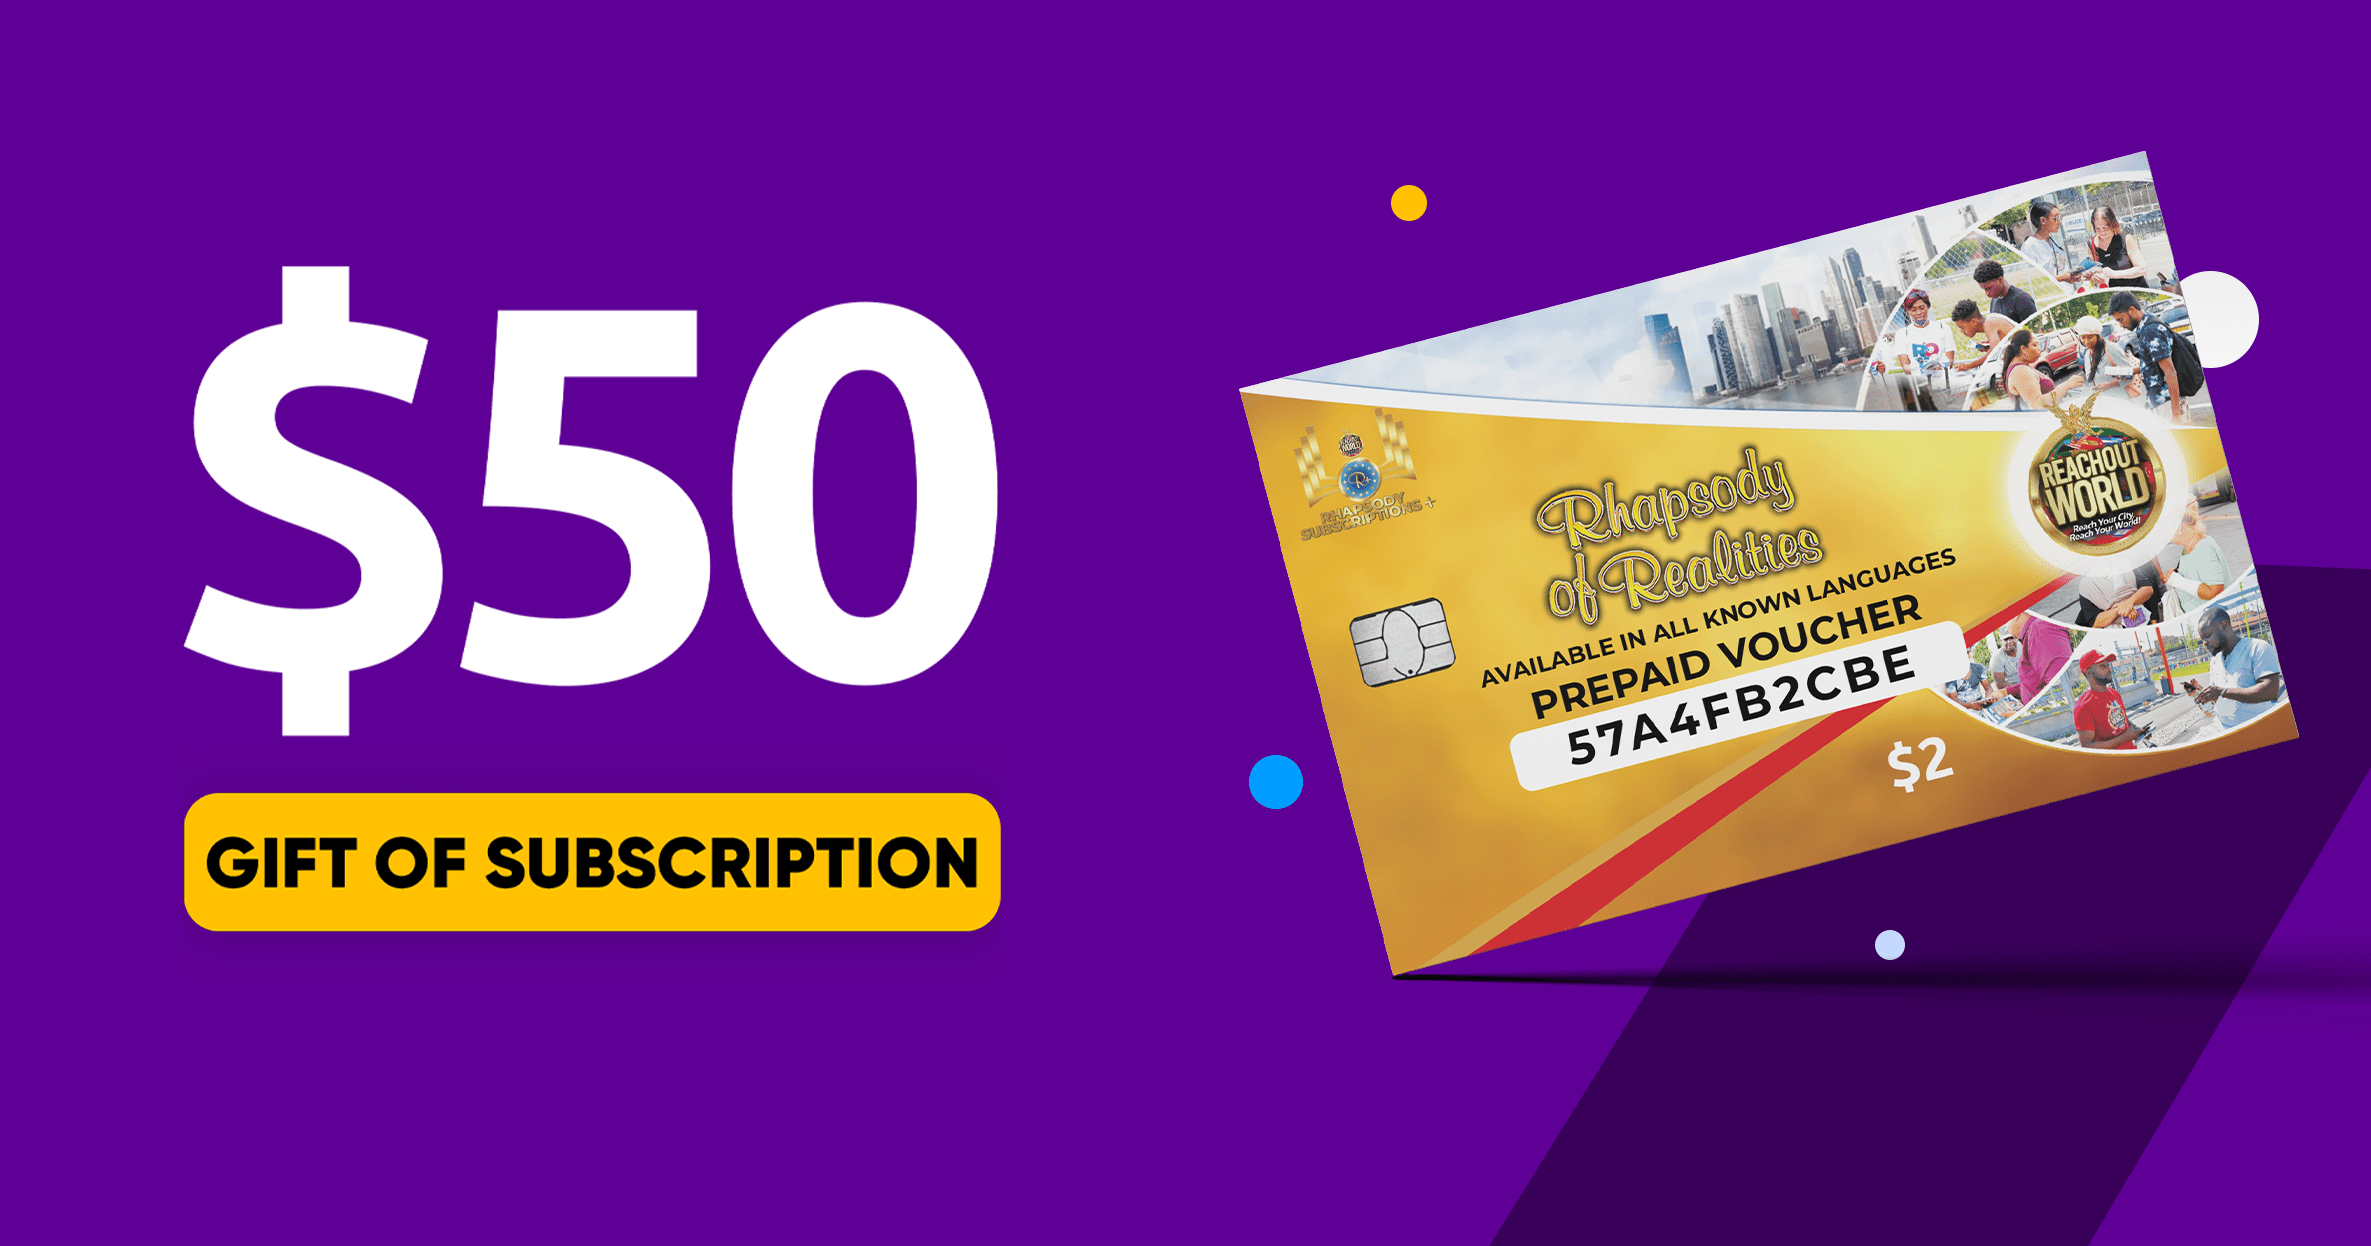 Gift a subscription for $50